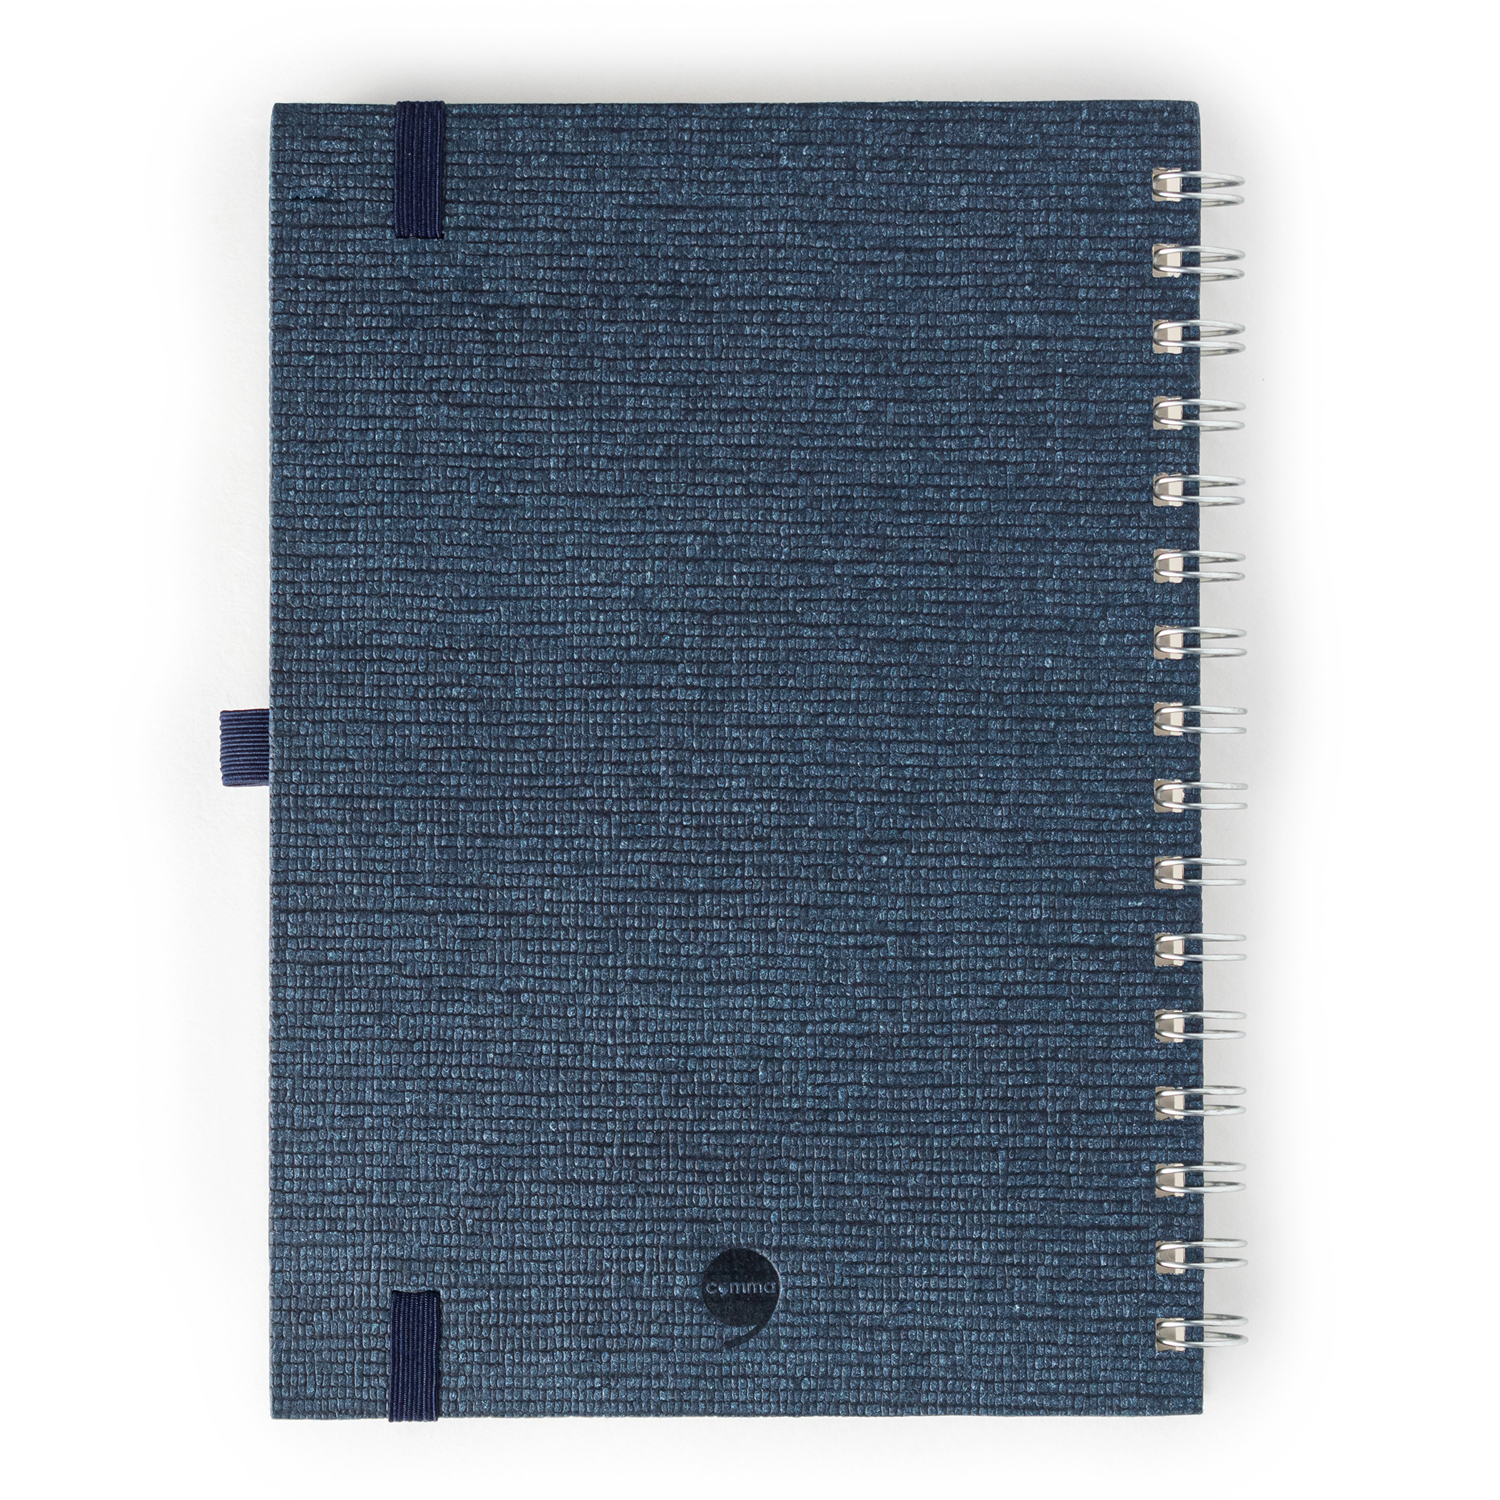 Comma Abaca - A5 Size - Wire-O-Bound Notebook (Navy Blue)